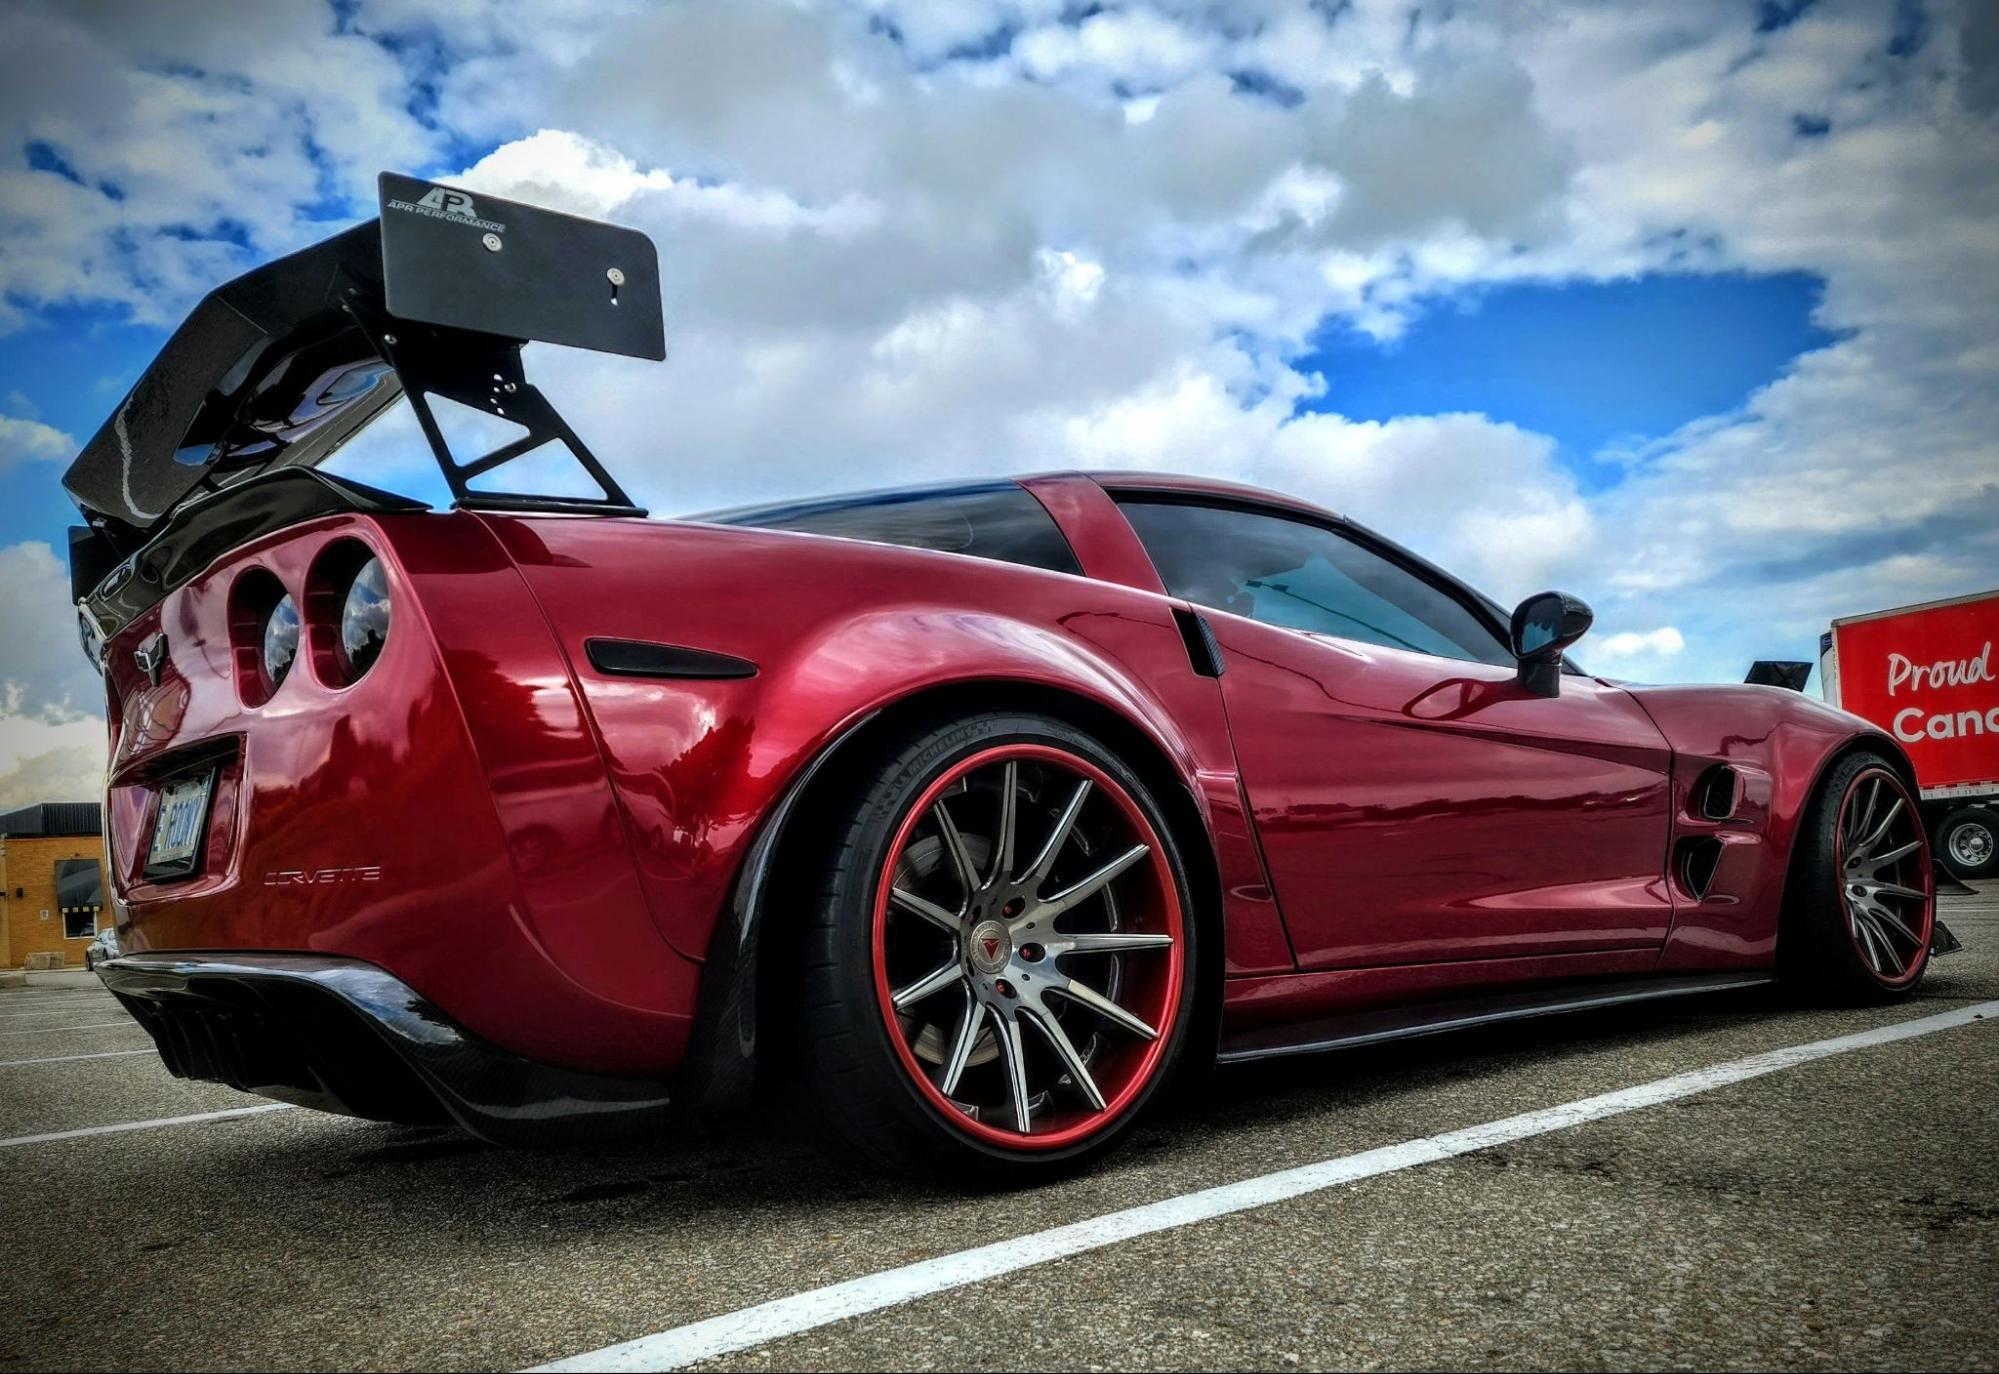 Lowered Z06, with functional aerodynamics